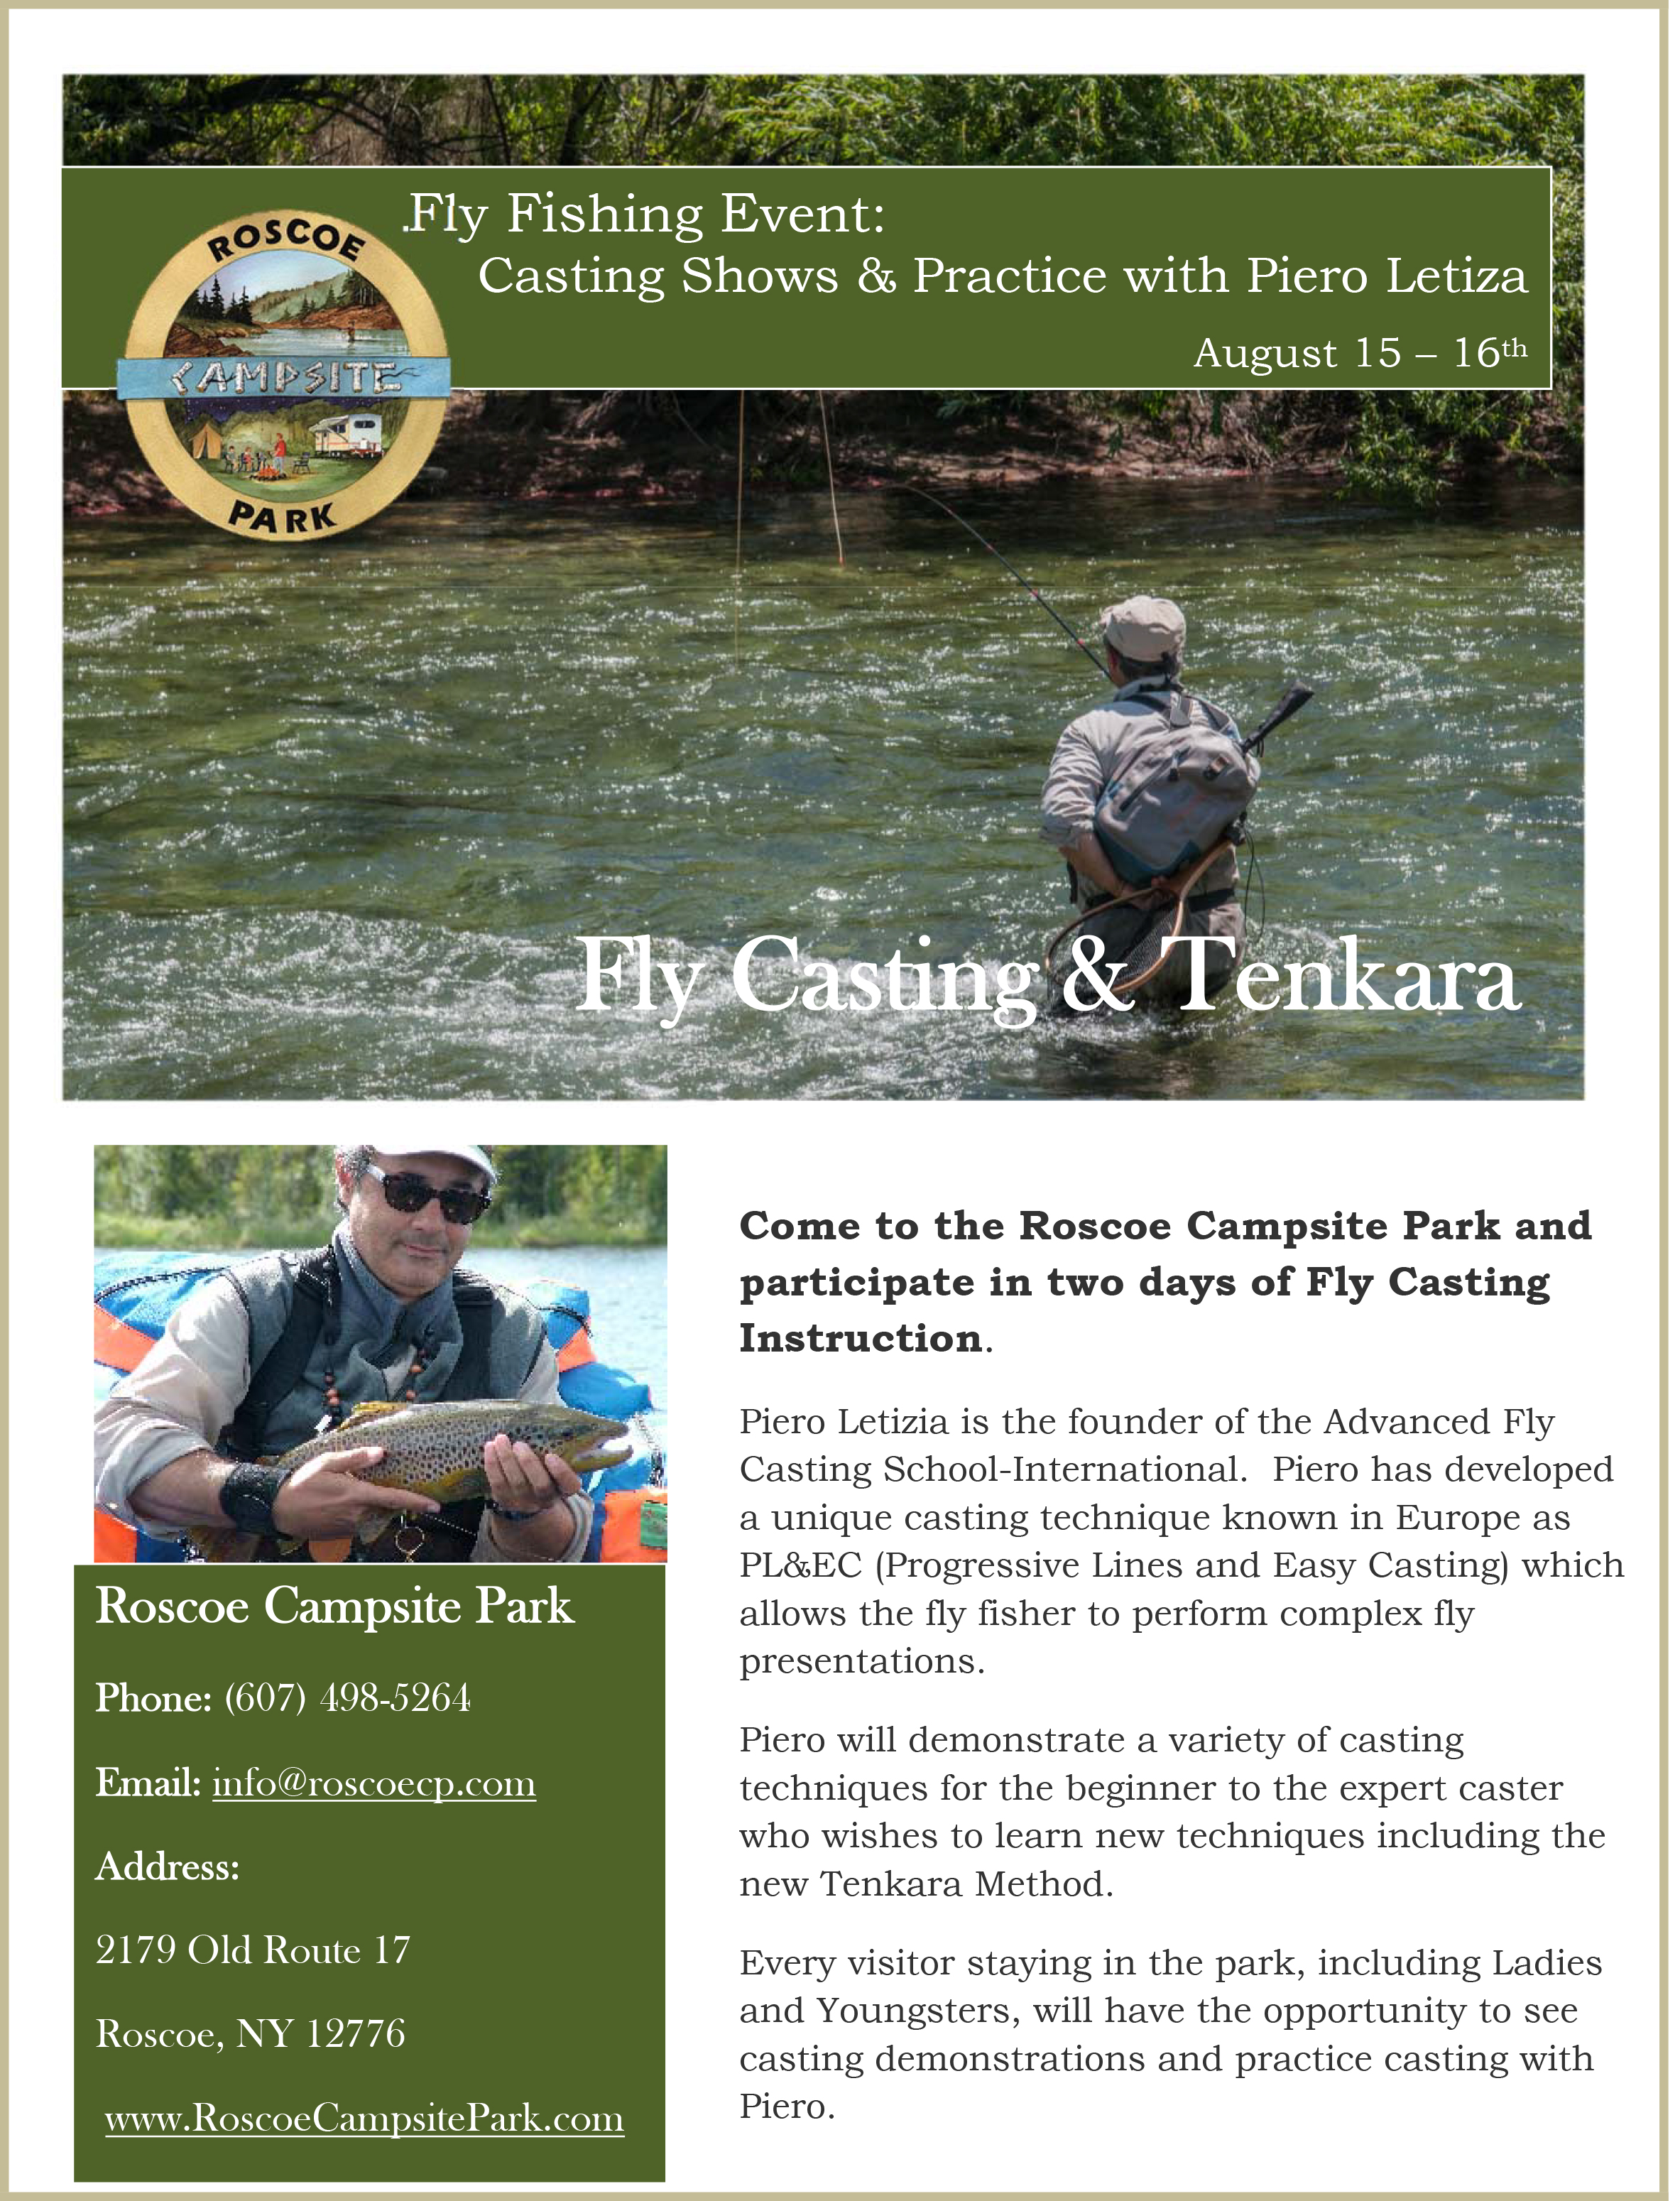 Fly Fishing Event: Casting Shows & Practice with Piero Letiza